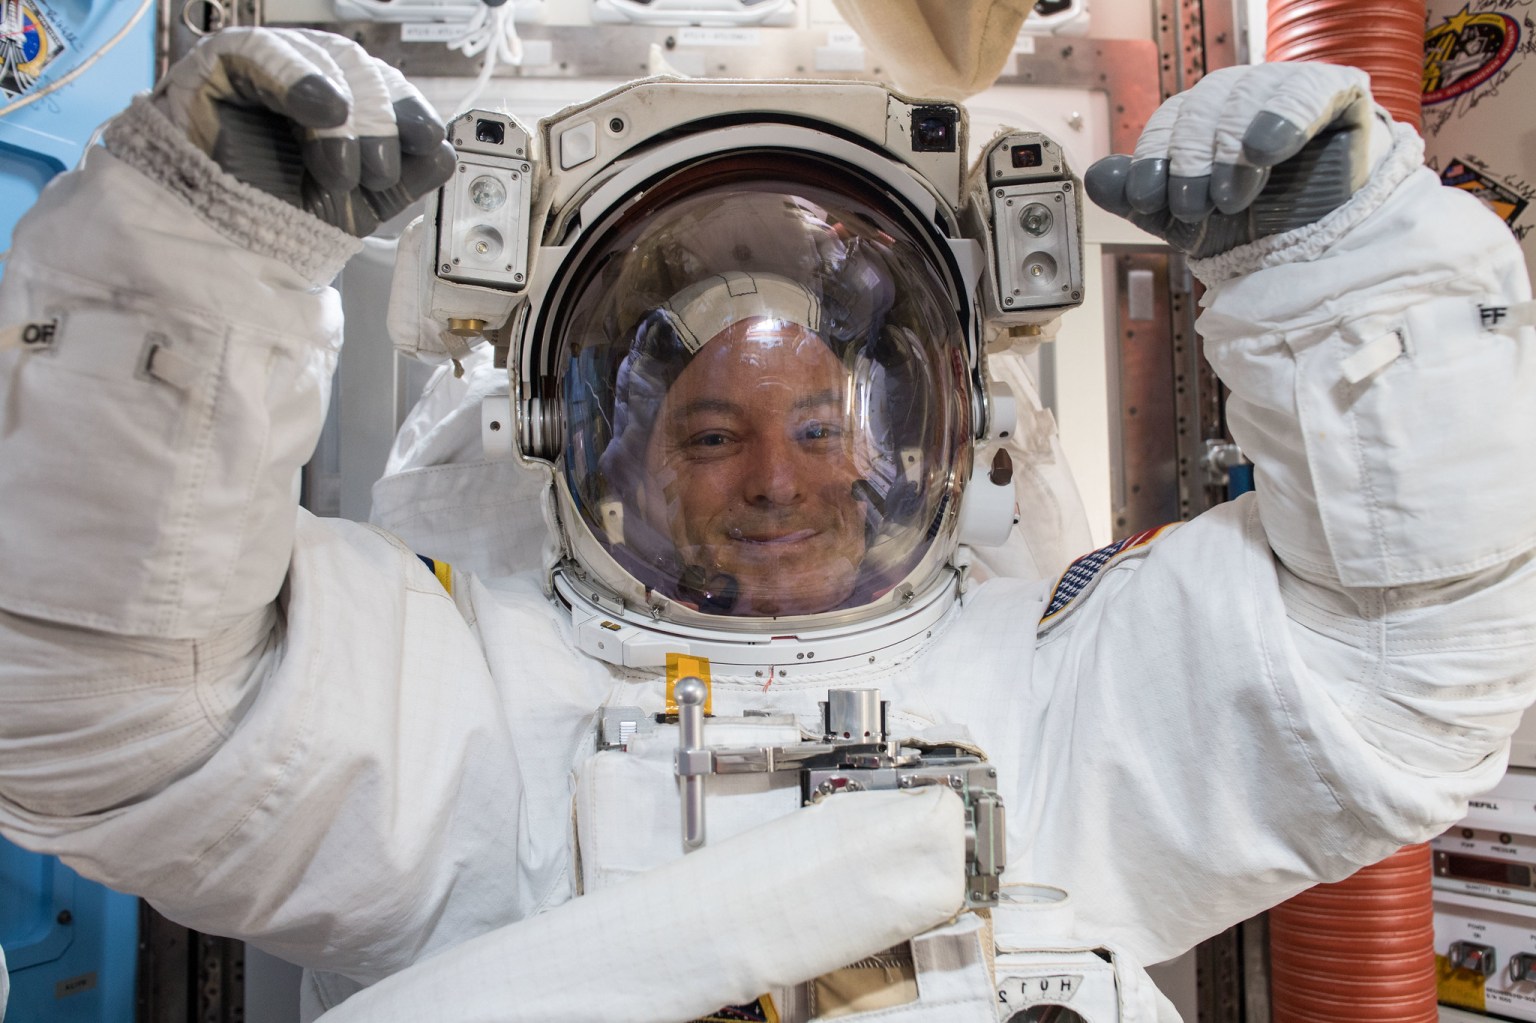 NASA astronaut Scott Tingle wears a U.S. spacesuit inside the Quest Airlock preparing for his first spacewalk.